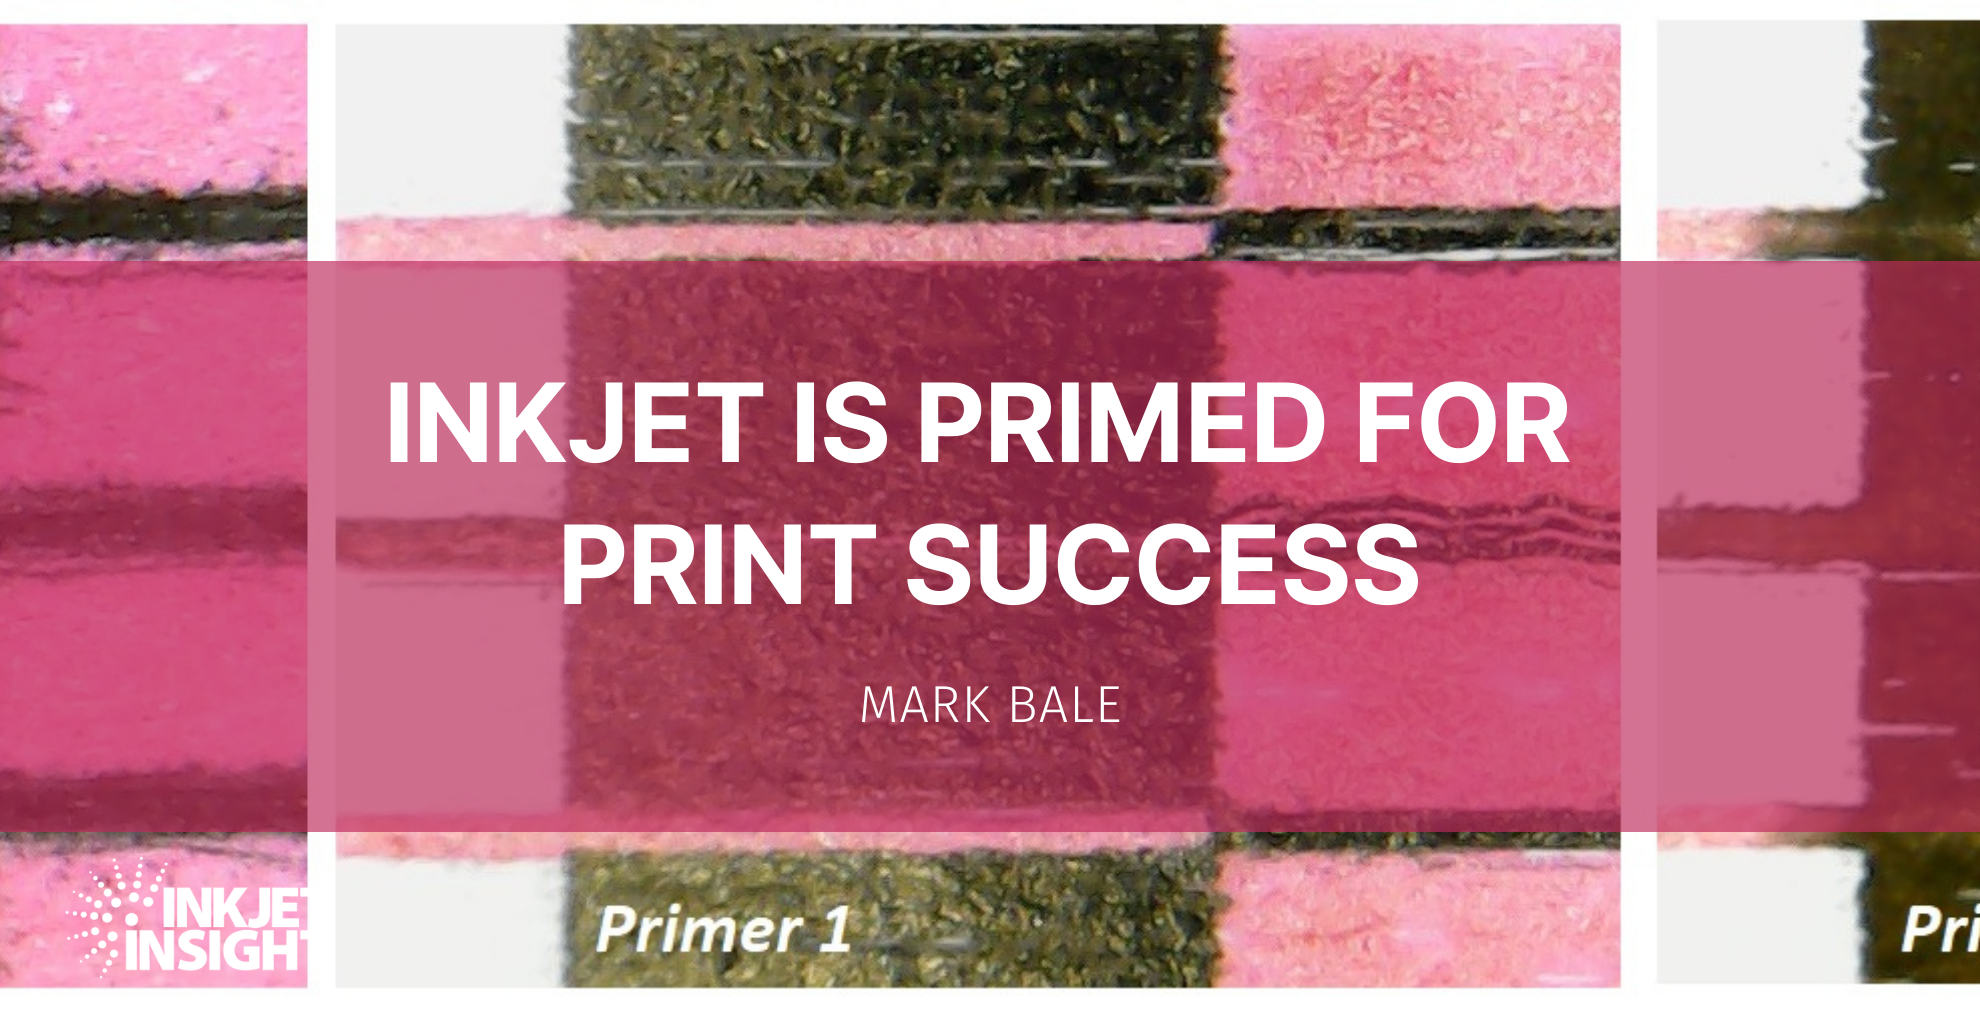 Featured image for “Inkjet is Primed for Print Success”